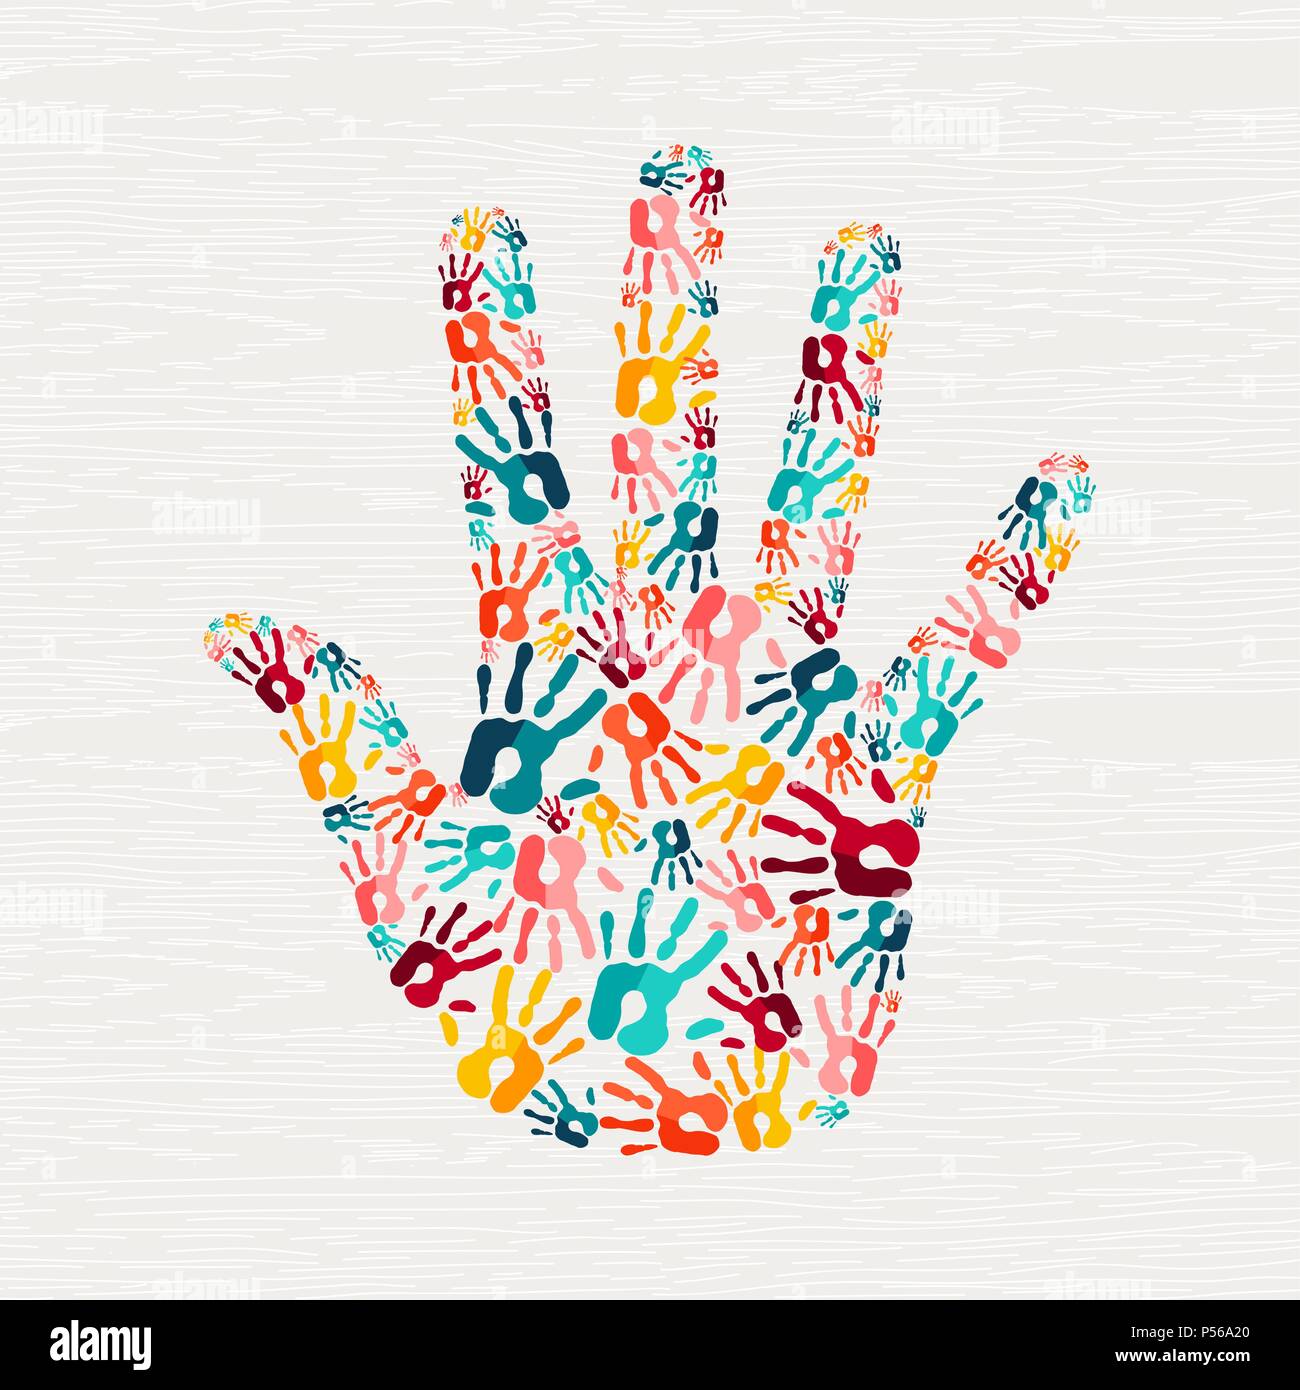 Human hand print shape concept. Colorful paint handprint background for diverse community or social project. EPS10 vector. Stock Vector